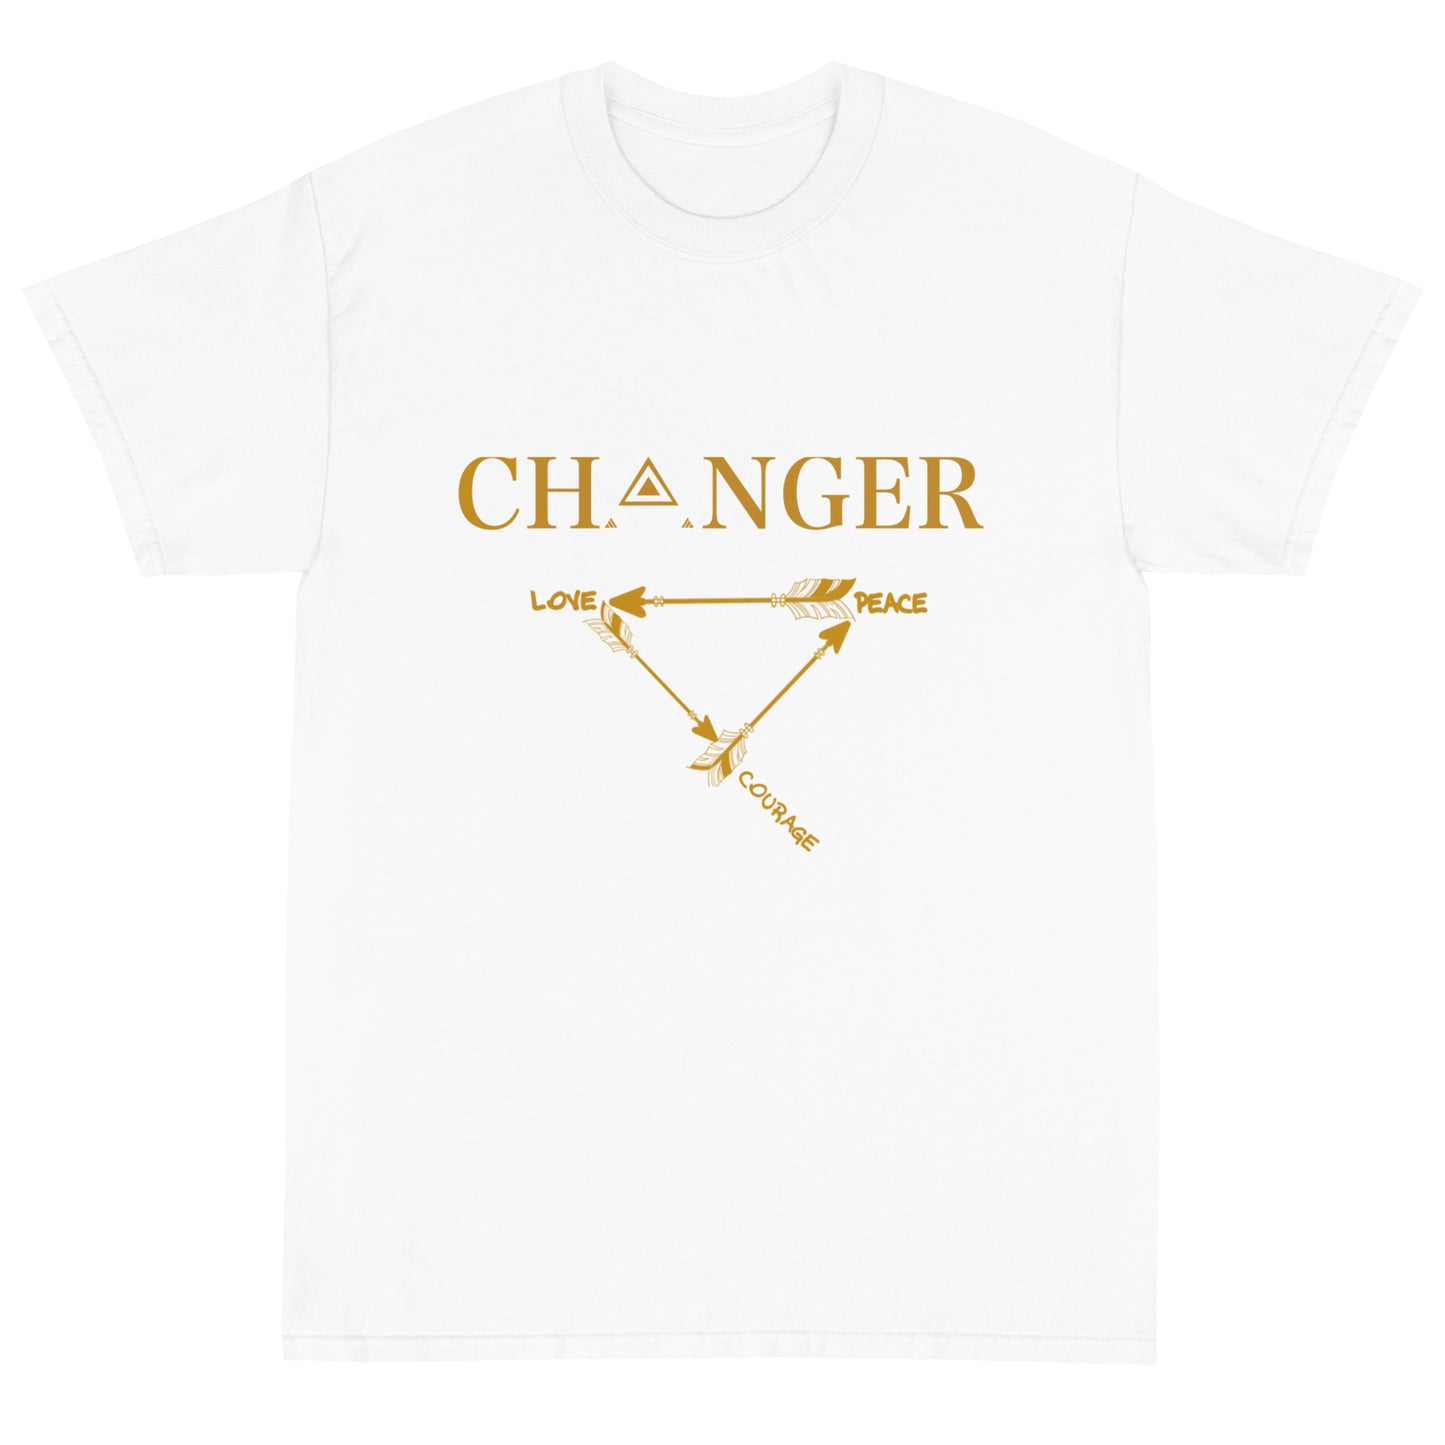 The Changer Tee